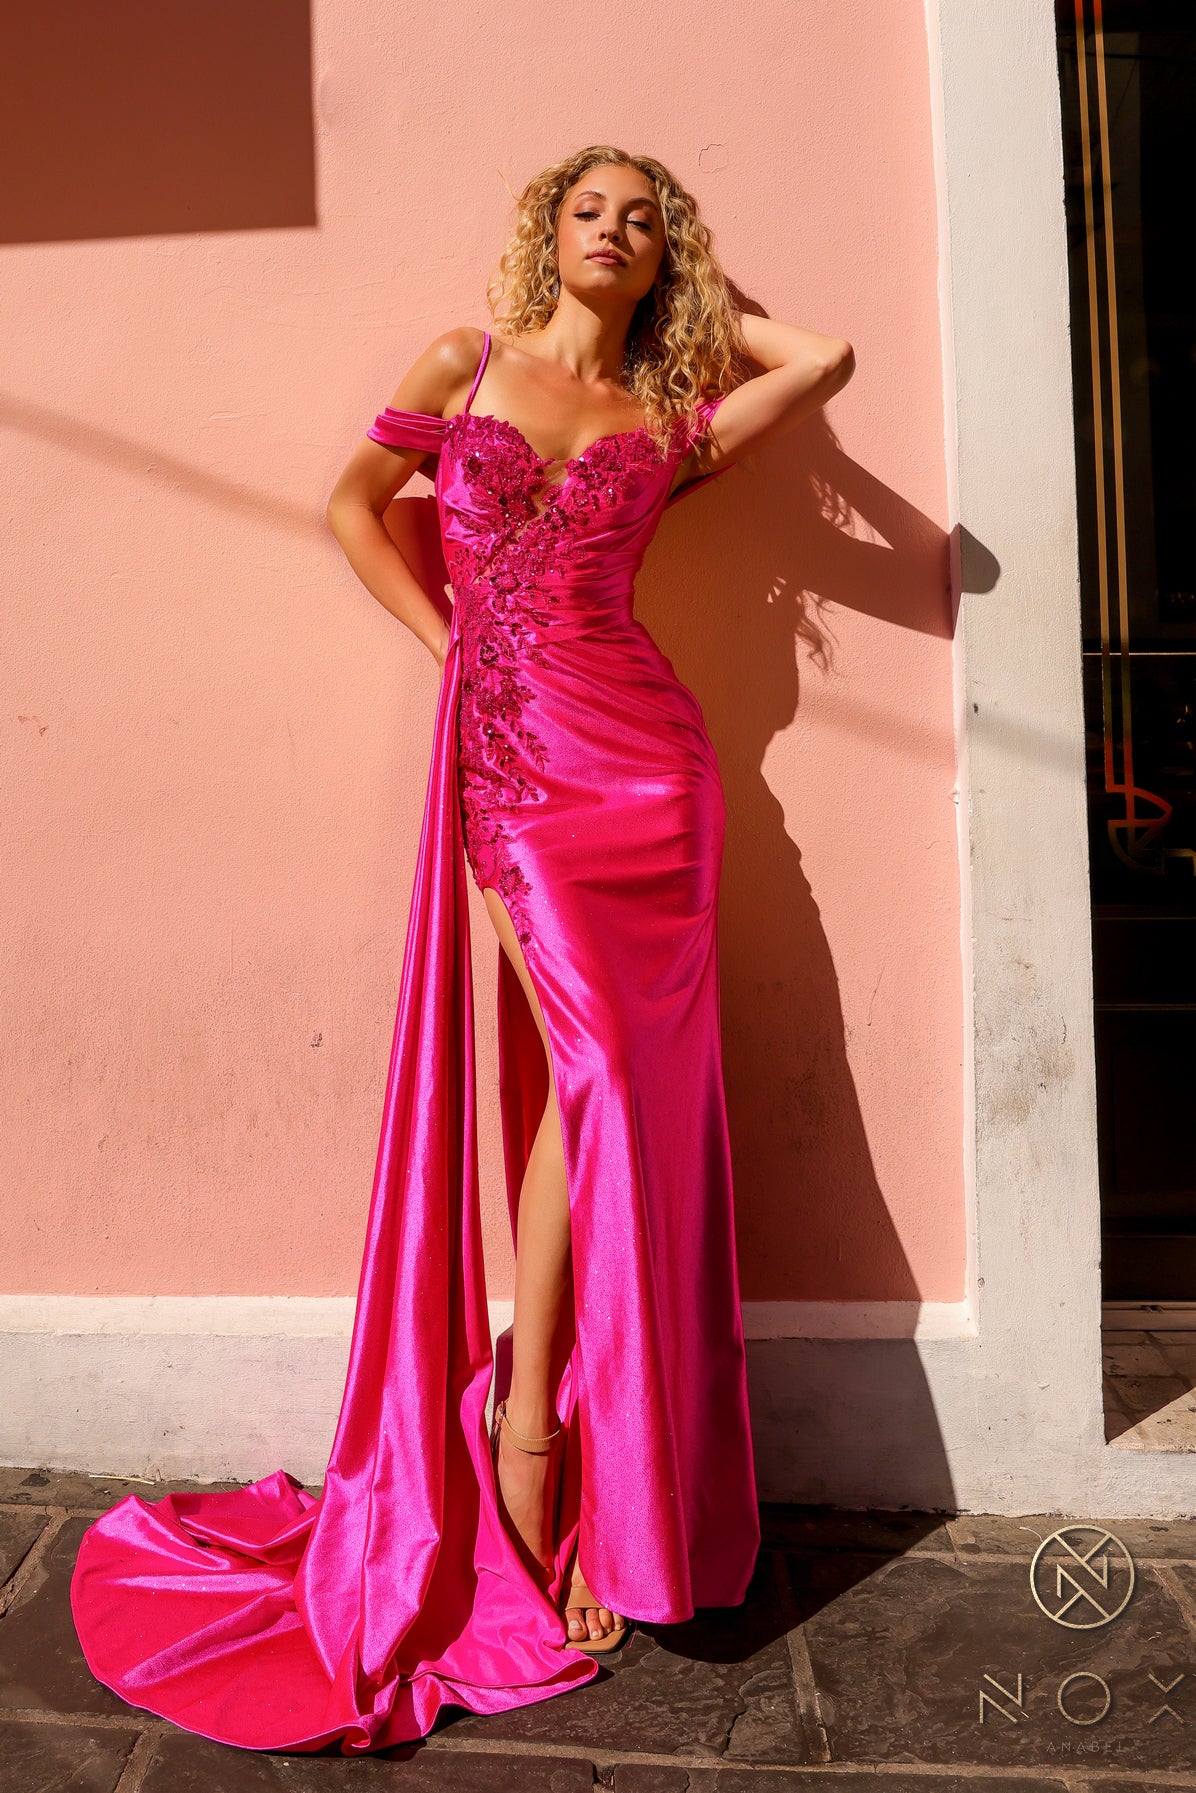 Introducing the Nox Anabel E1451 prom dress, featuring a stunning high slit and off the shoulder lace design. Made with long fitted satin and a sheer illusion bodice, this dress exudes elegance and sophistication. Perfect for prom, pageants, and other formal occasions.  Sizes: 2-16  Colors: Fuchsia, Royal Blue